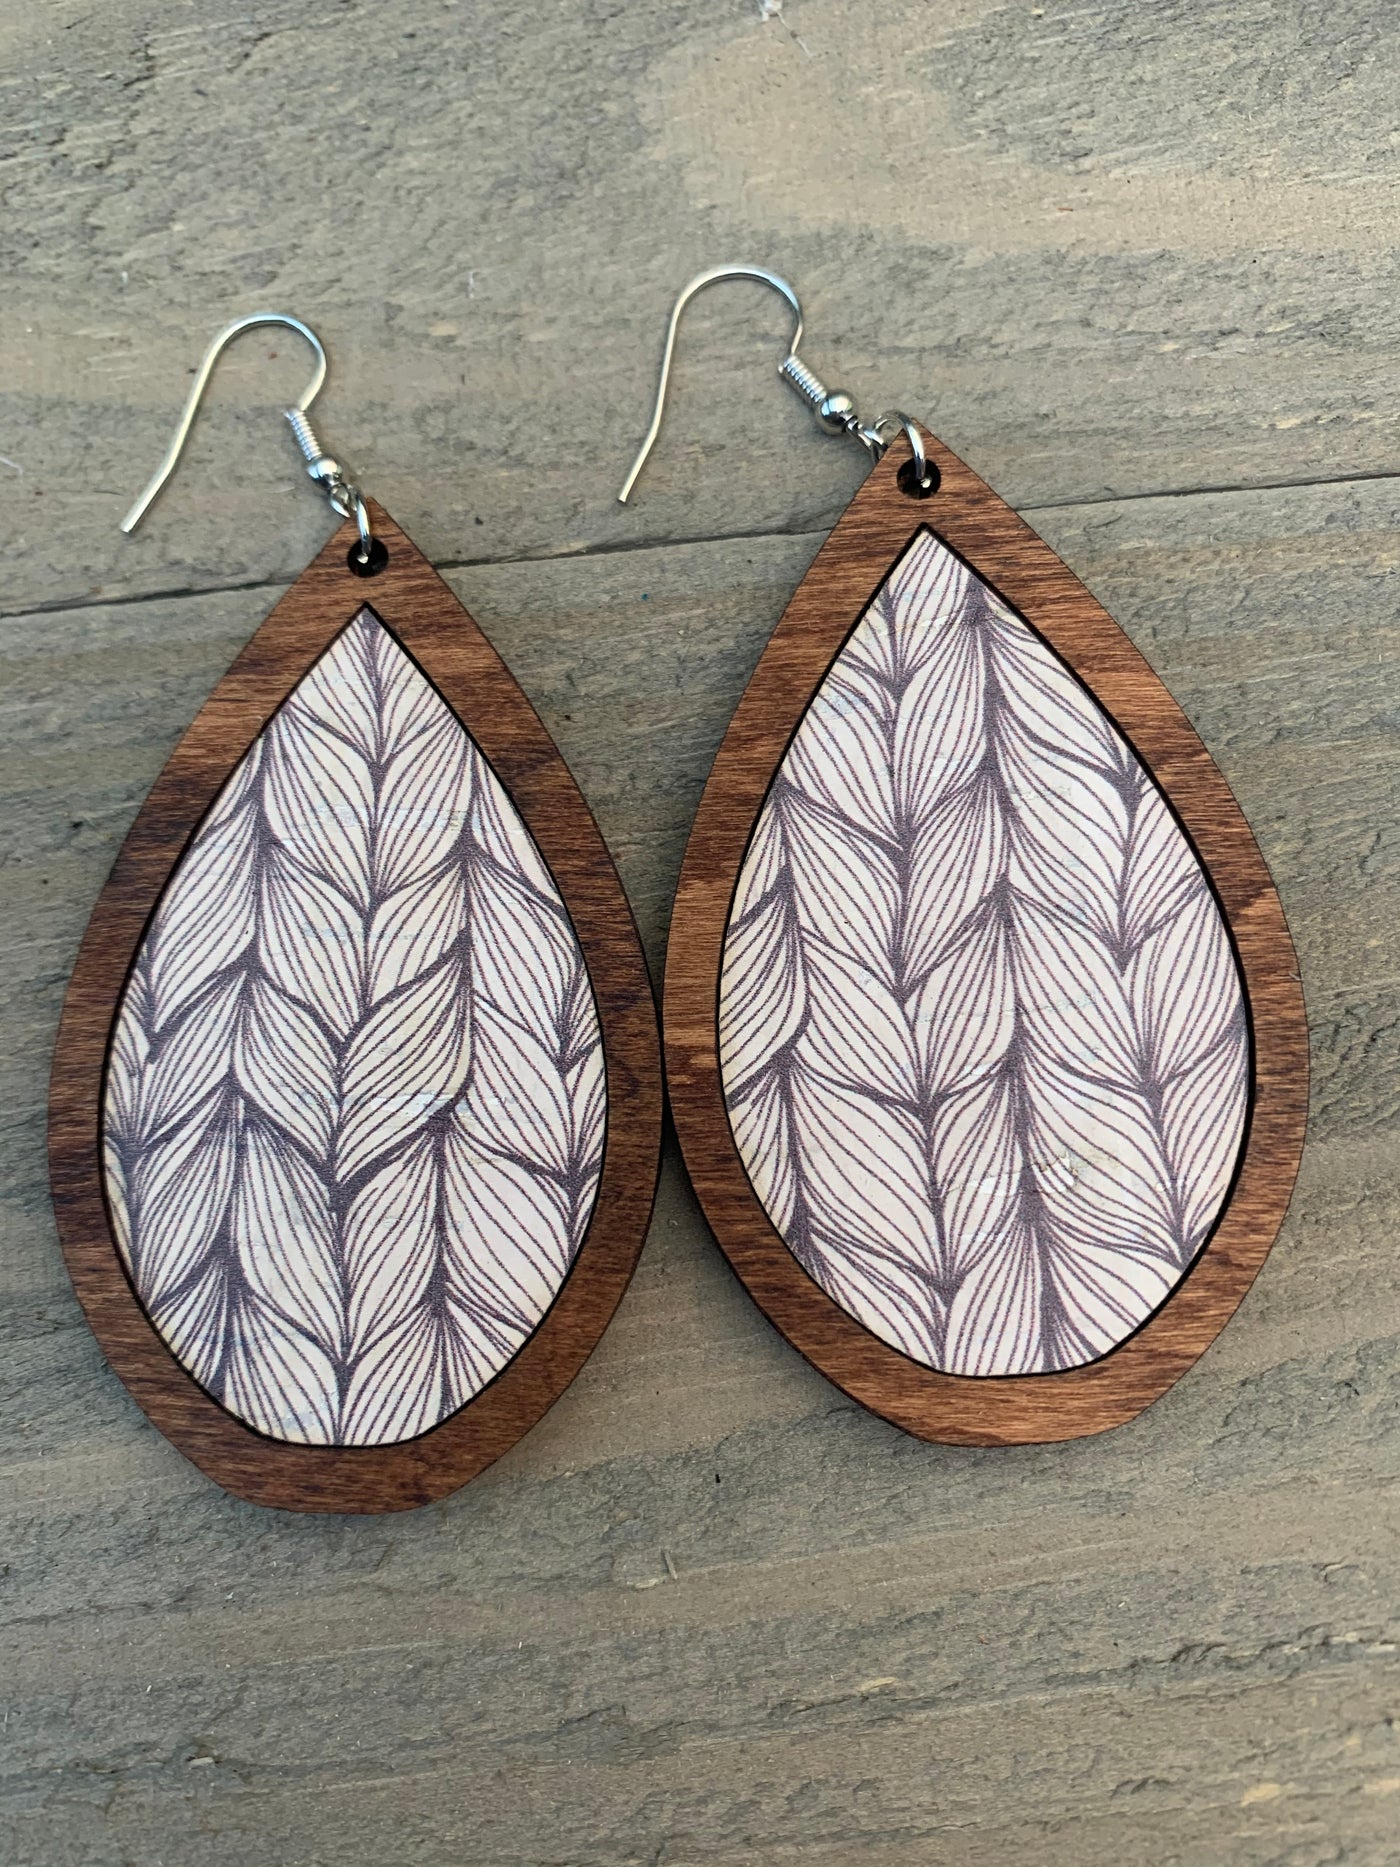 White and Blue Woven Cork and Wood Teardrop Earrings - Jill's Jewels | Unique, Handcrafted, Trendy, And Fun Jewelry